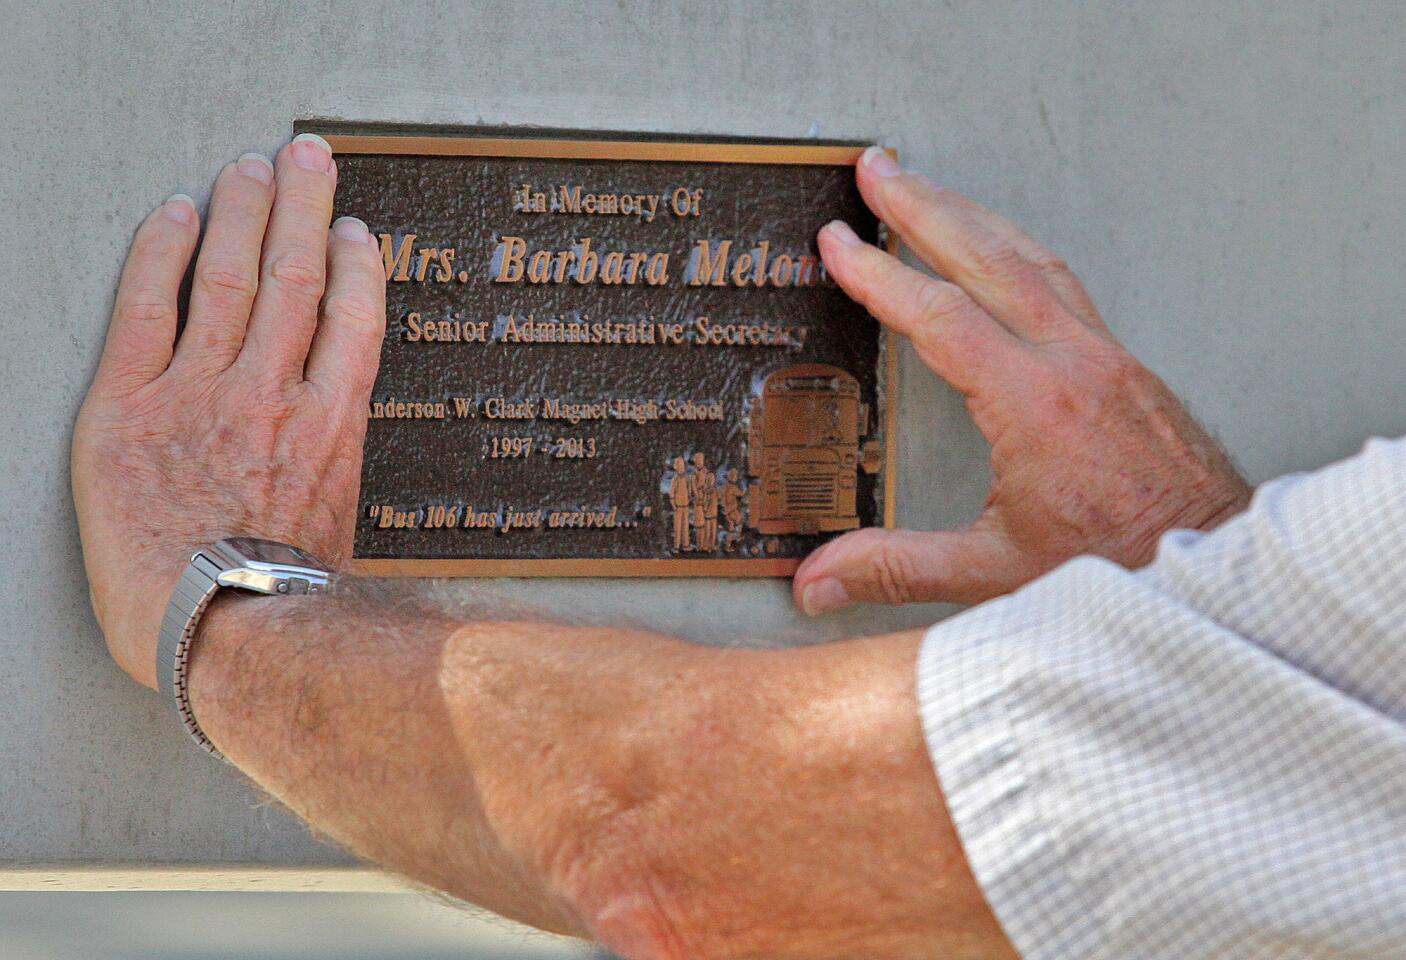 The hands of John Melone, the husband of Barbara Melone, puts a placque on a bench that is being dedicated in her honor at Clark Magnet High School in Glendale on Wednesday, April 30, 2014. Melone a senior administrative secretary at the school, died at the beginning of the school year, and the bench was placed in her honor.